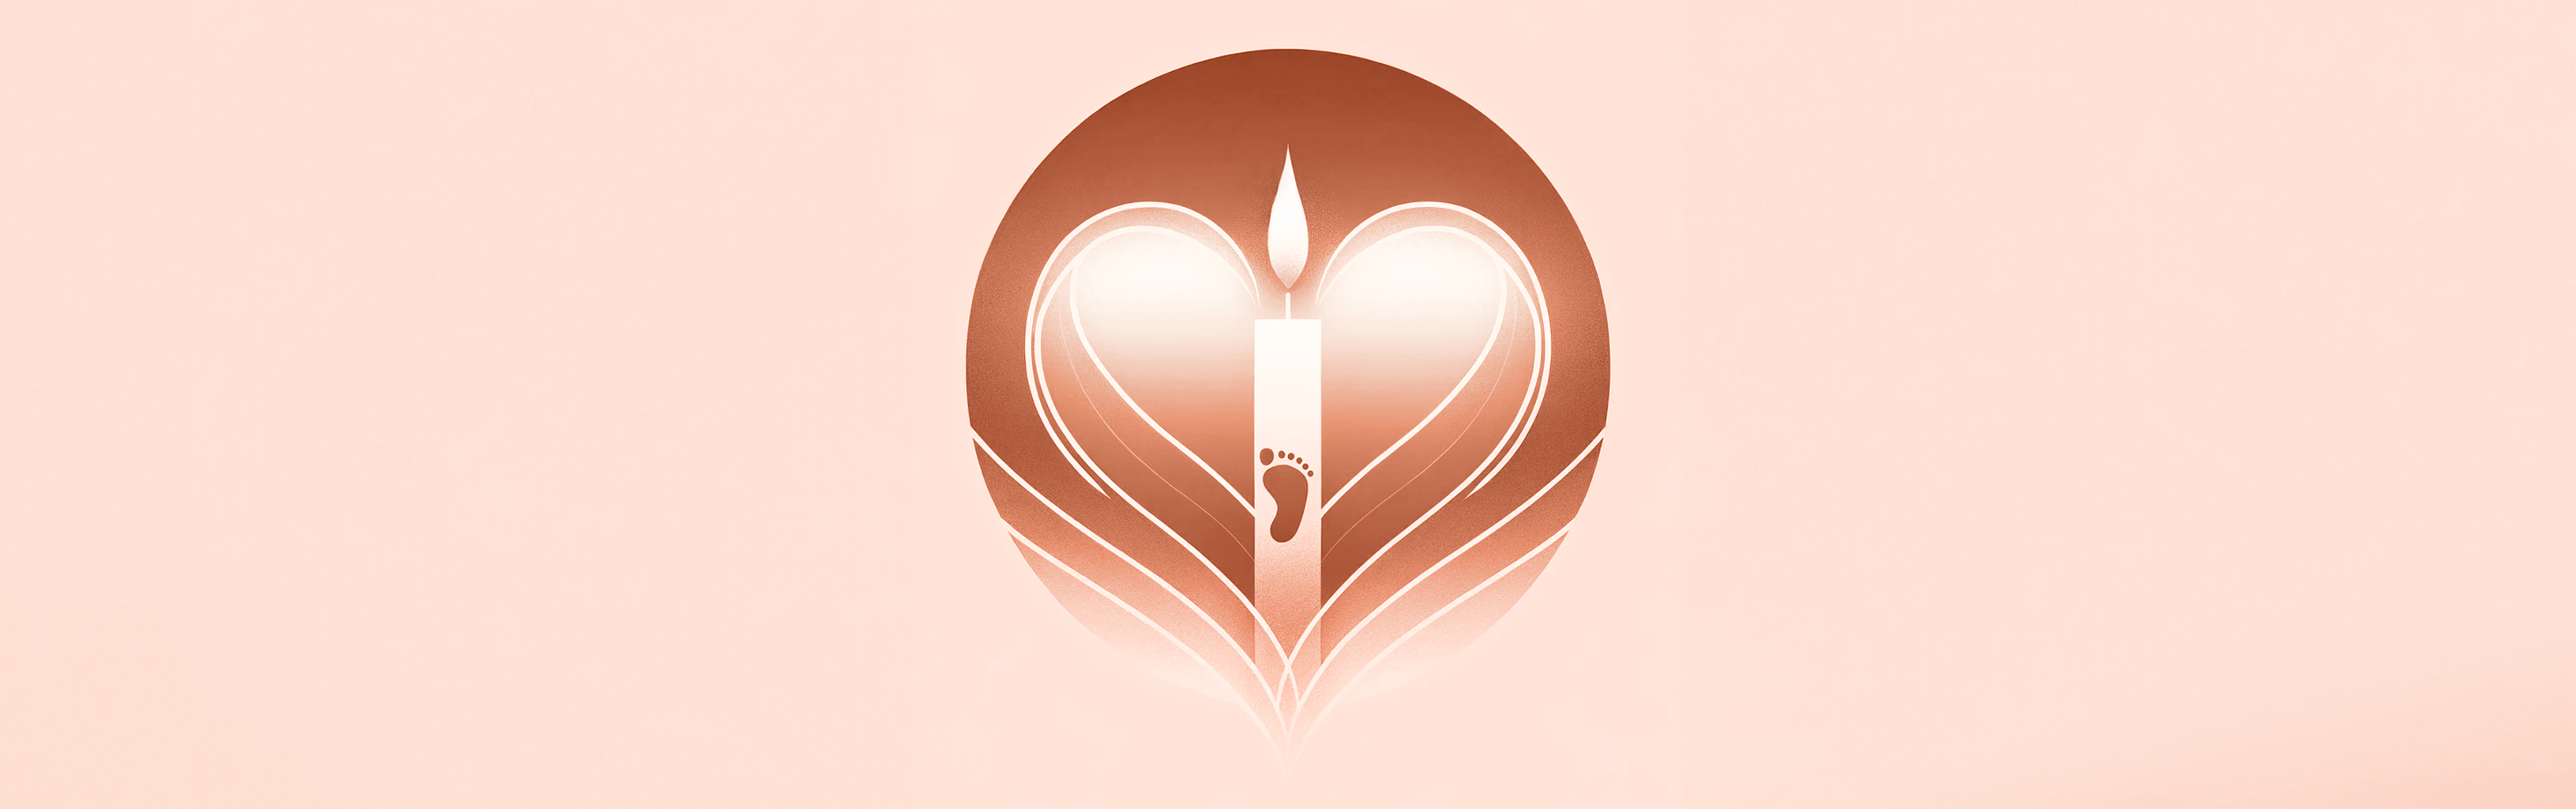 Modern and minimalist artwork by London Pregnancy Clinic, symbolising remembrance and hope with a stylised candle and heart for baby loss certificate pre-24 week.